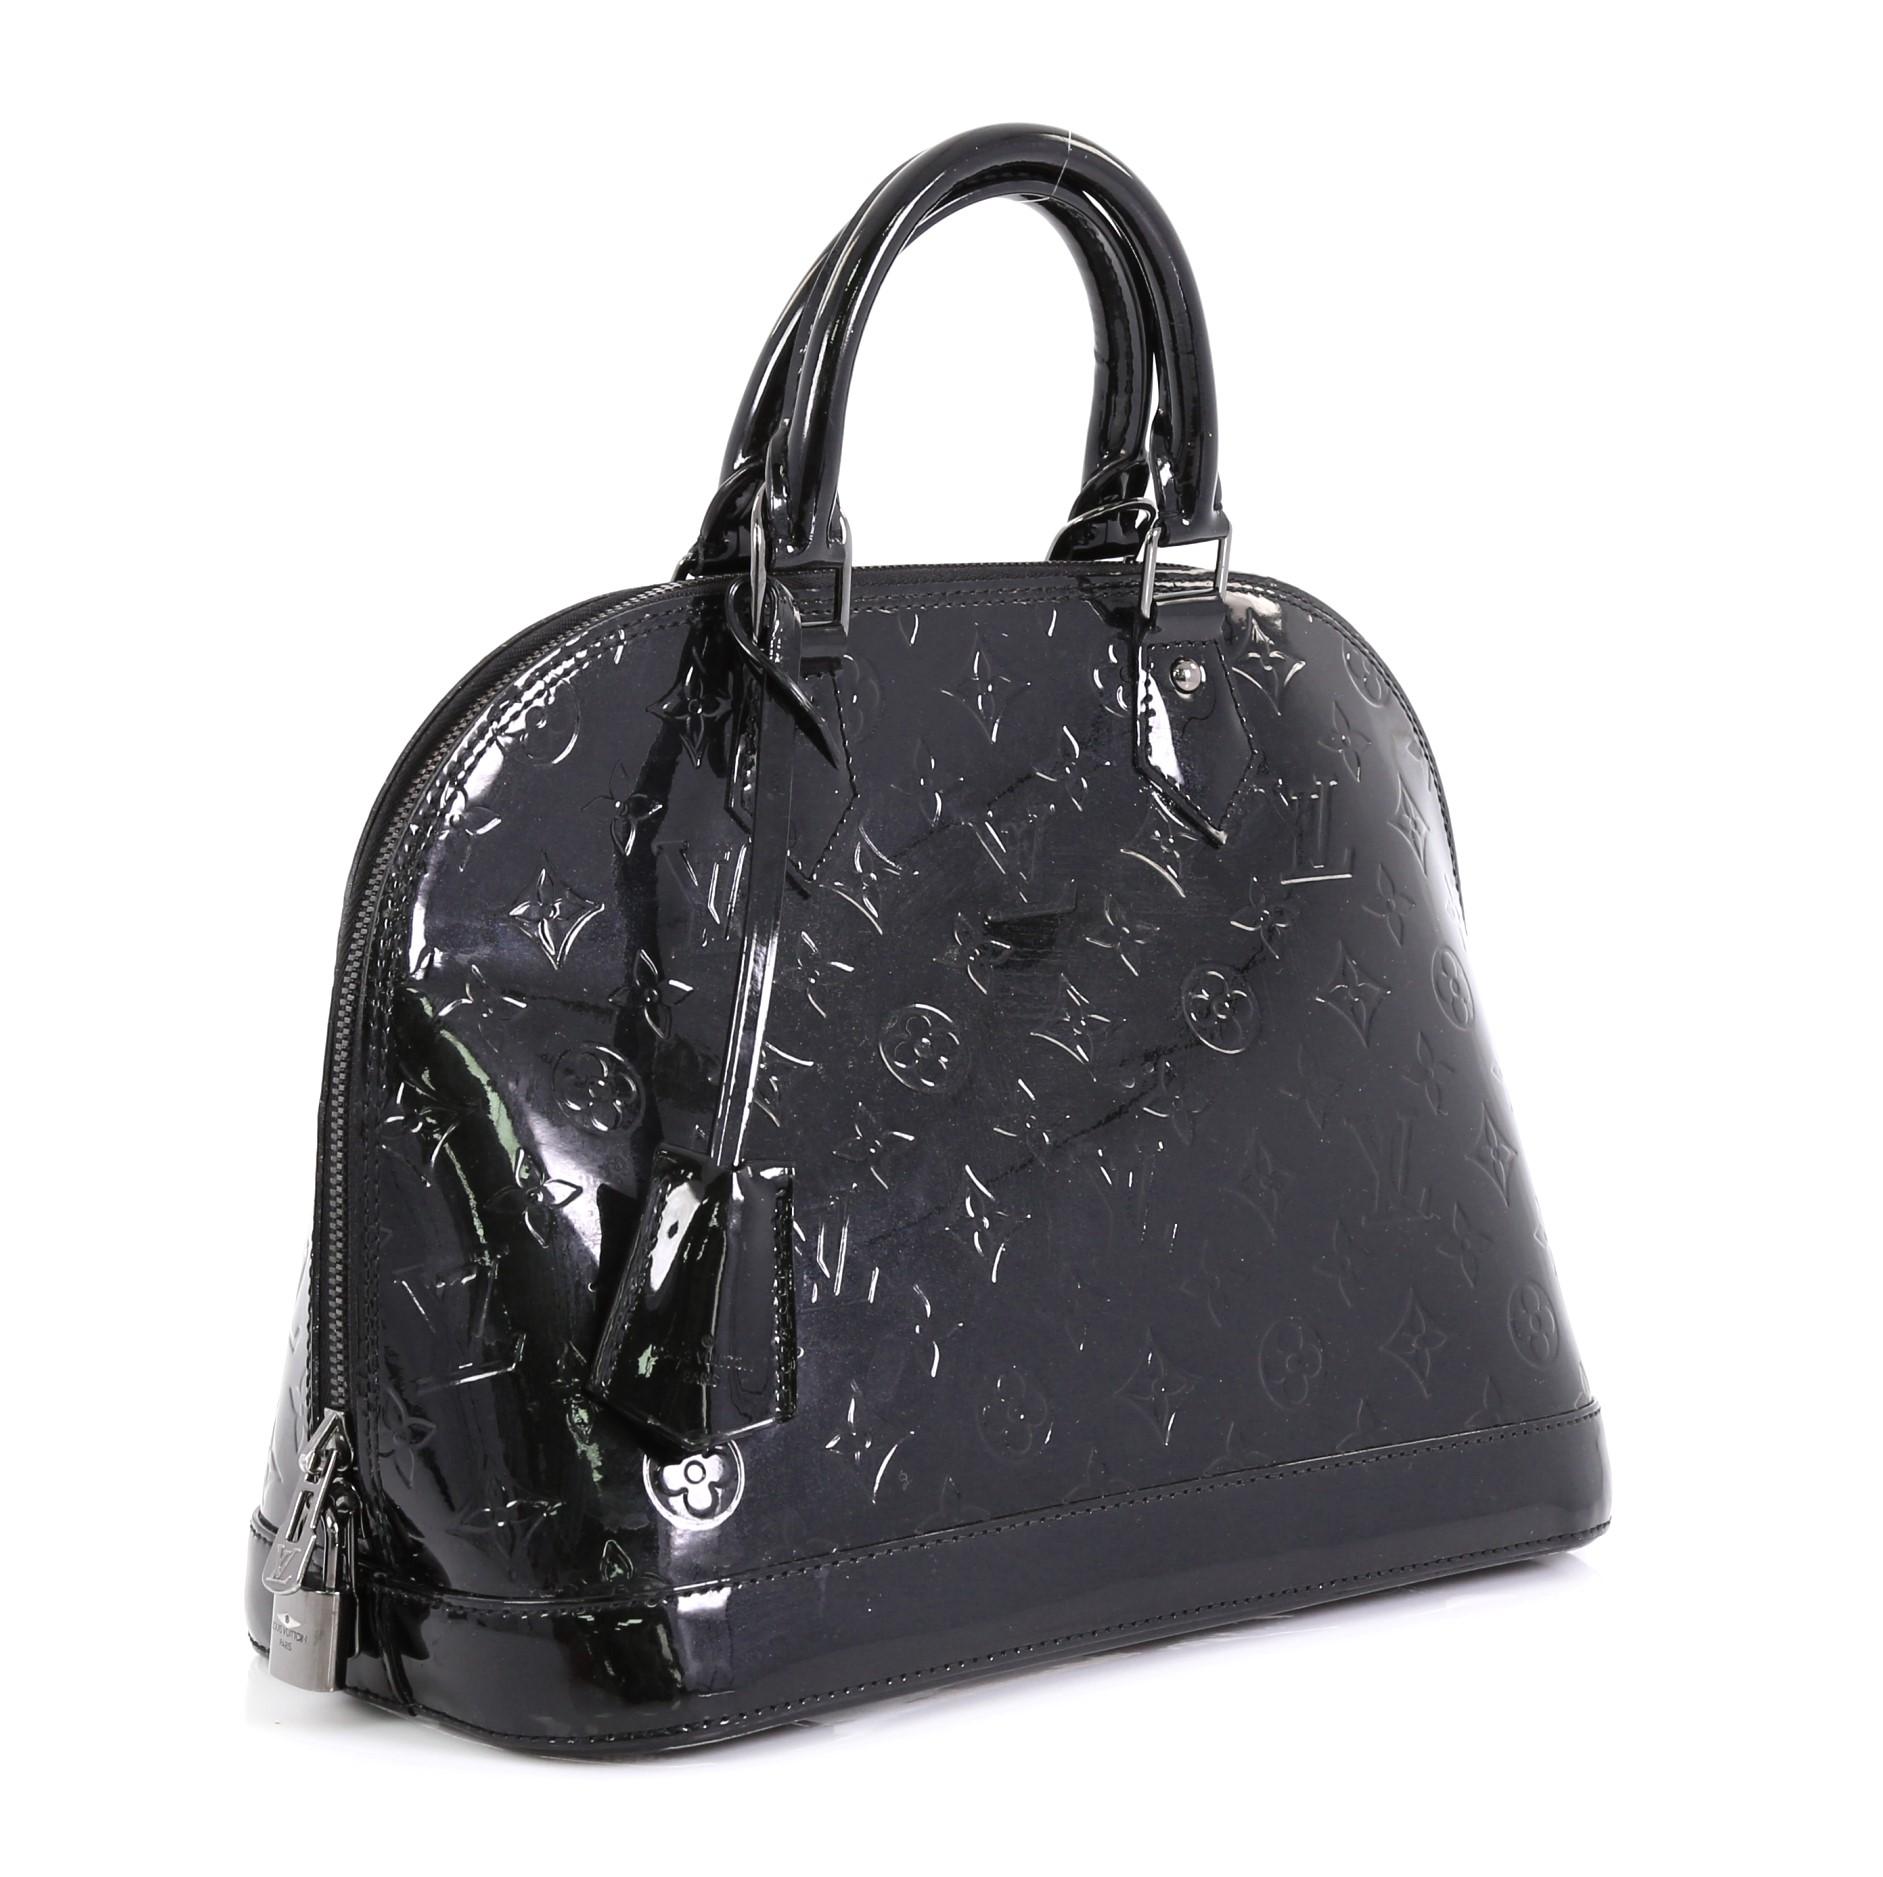 This Louis Vuitton Alma Handbag Monogram Vernis PM, crafted from black monogram vernis leather, features dual rolled handles, protective base studs, and gunmetal-tone hardware. Its zip closure opens to a black fabric interior with slip pockets.